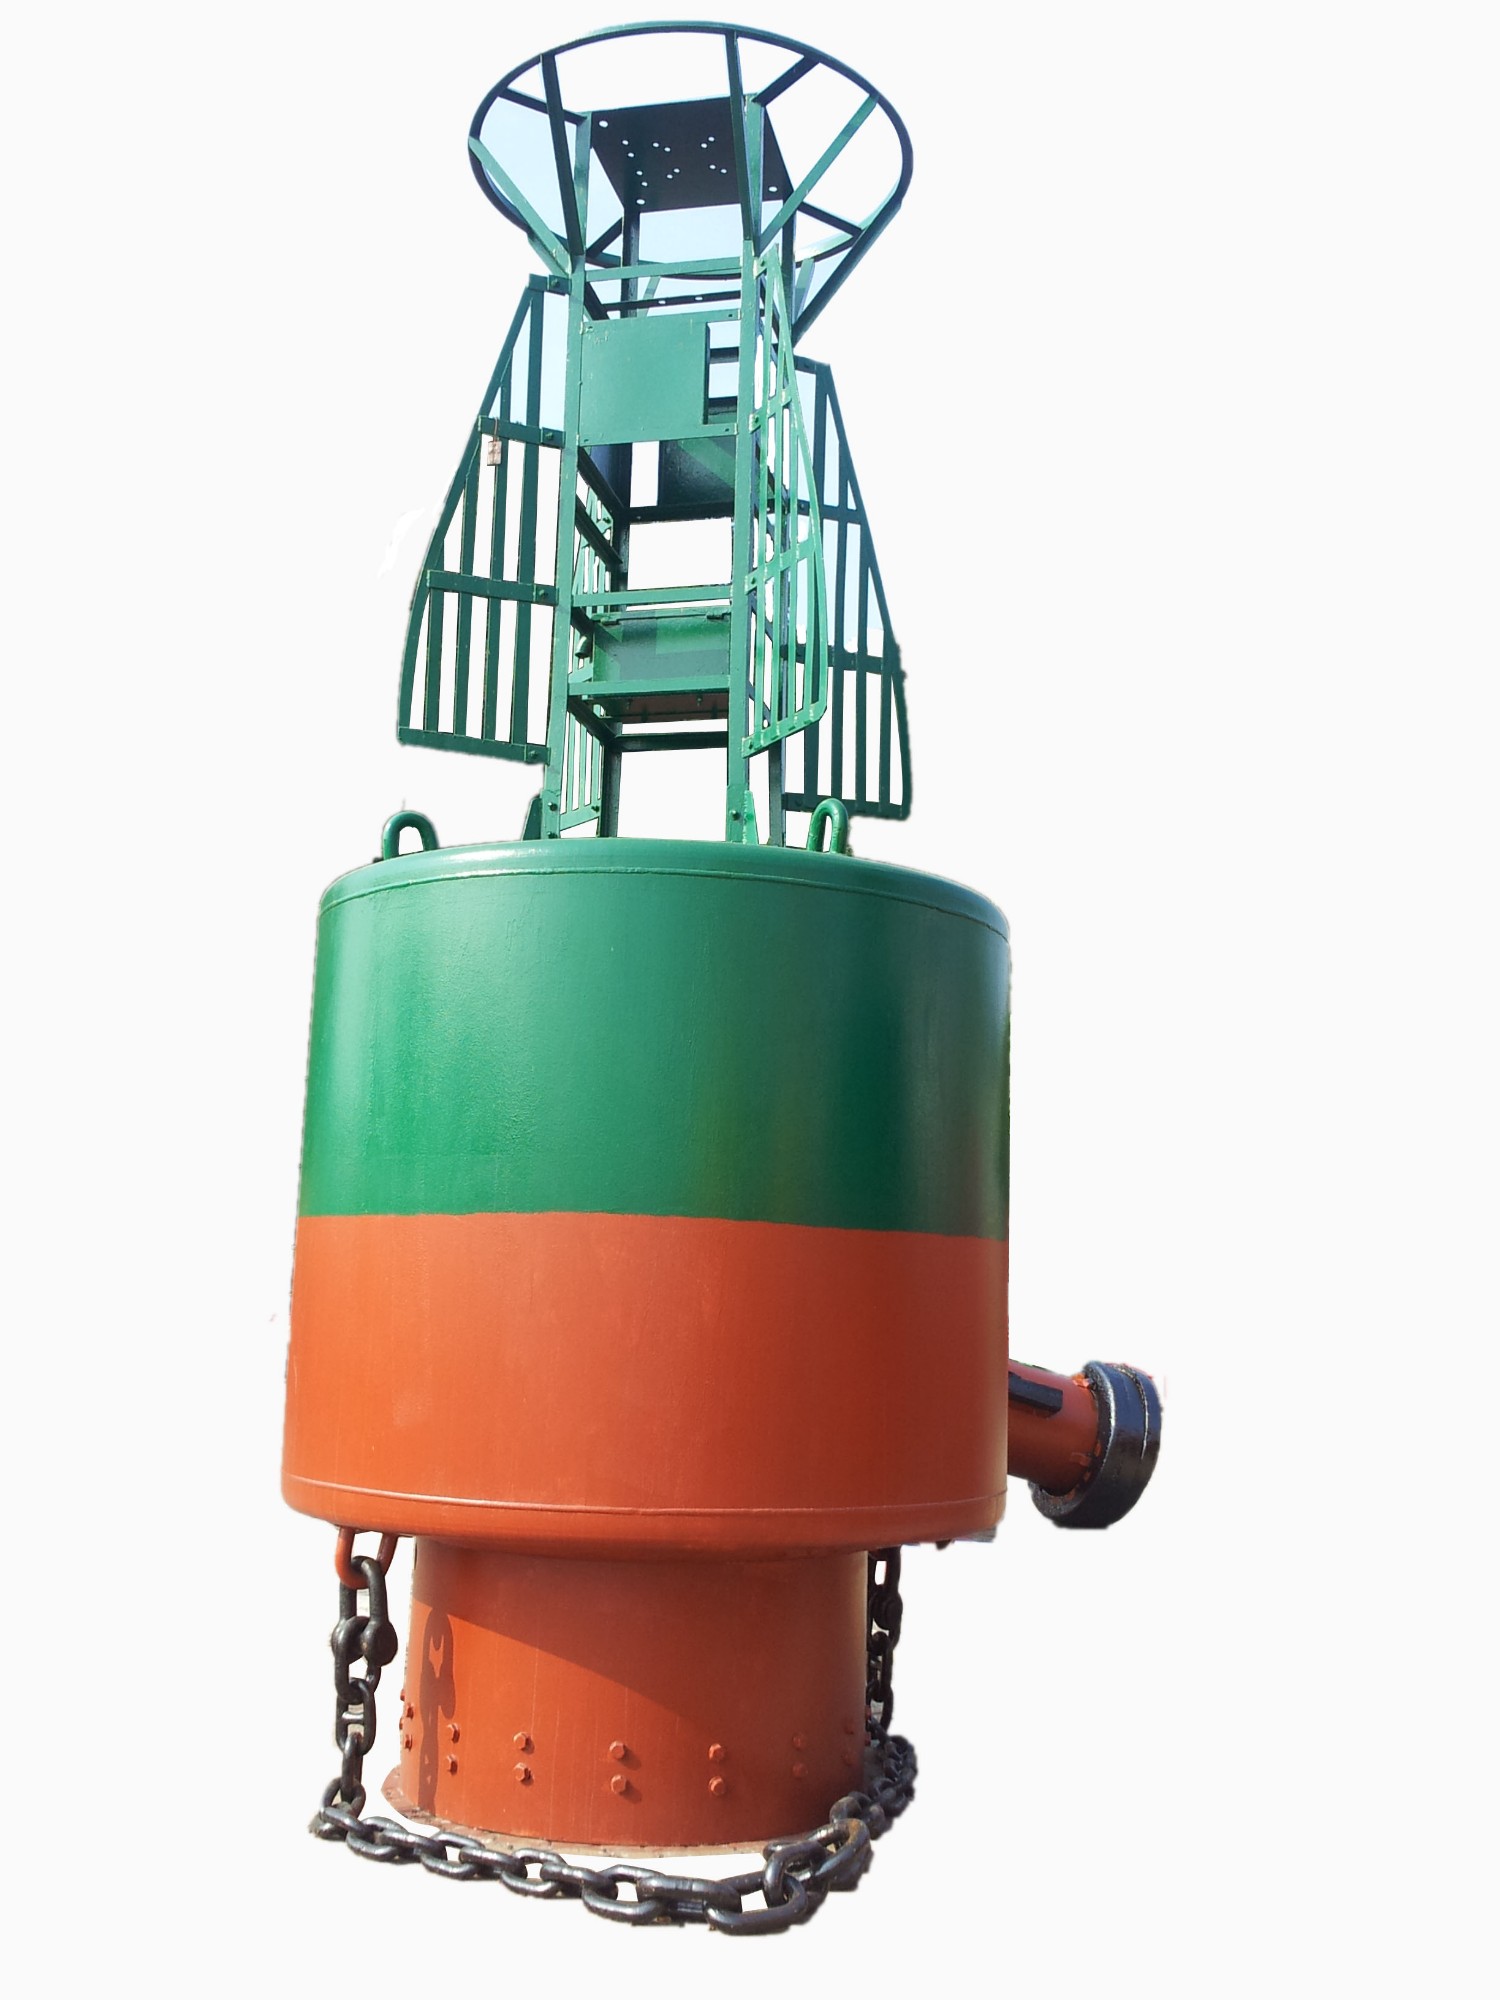 HF TYPE SHALLOW-WATER BUOY